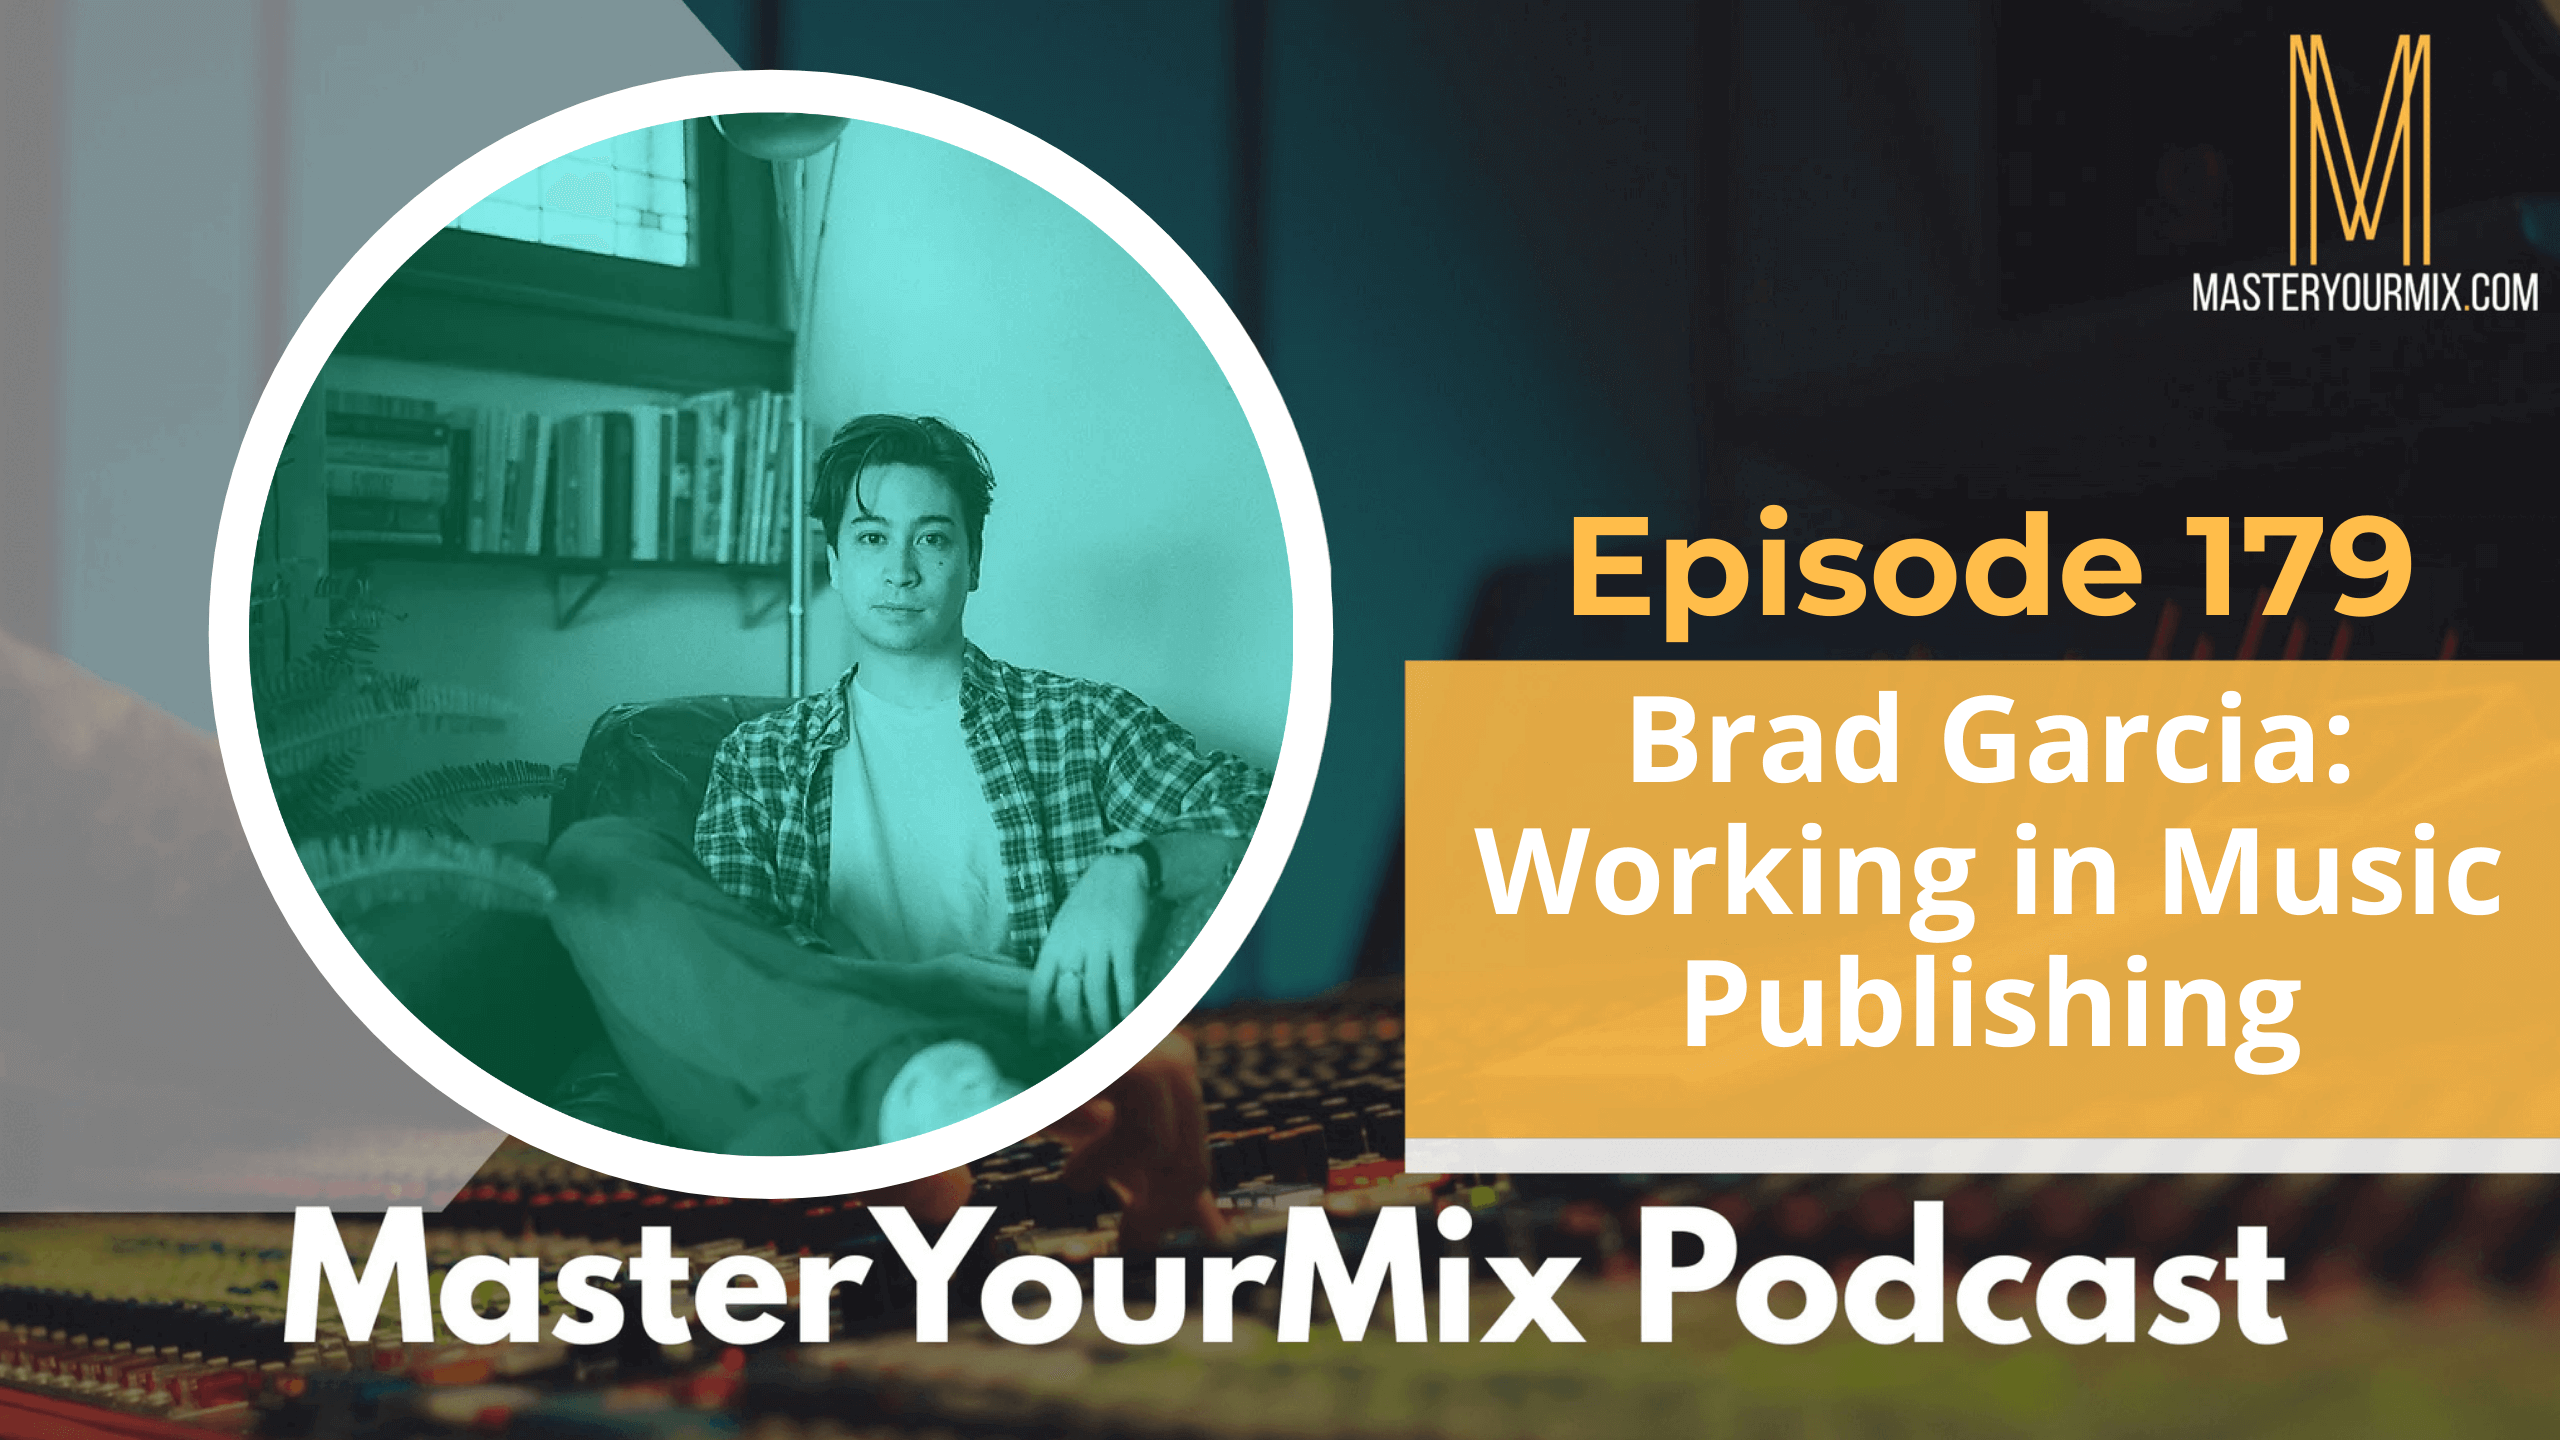 master your mix podcast, ep 179 brad garcia